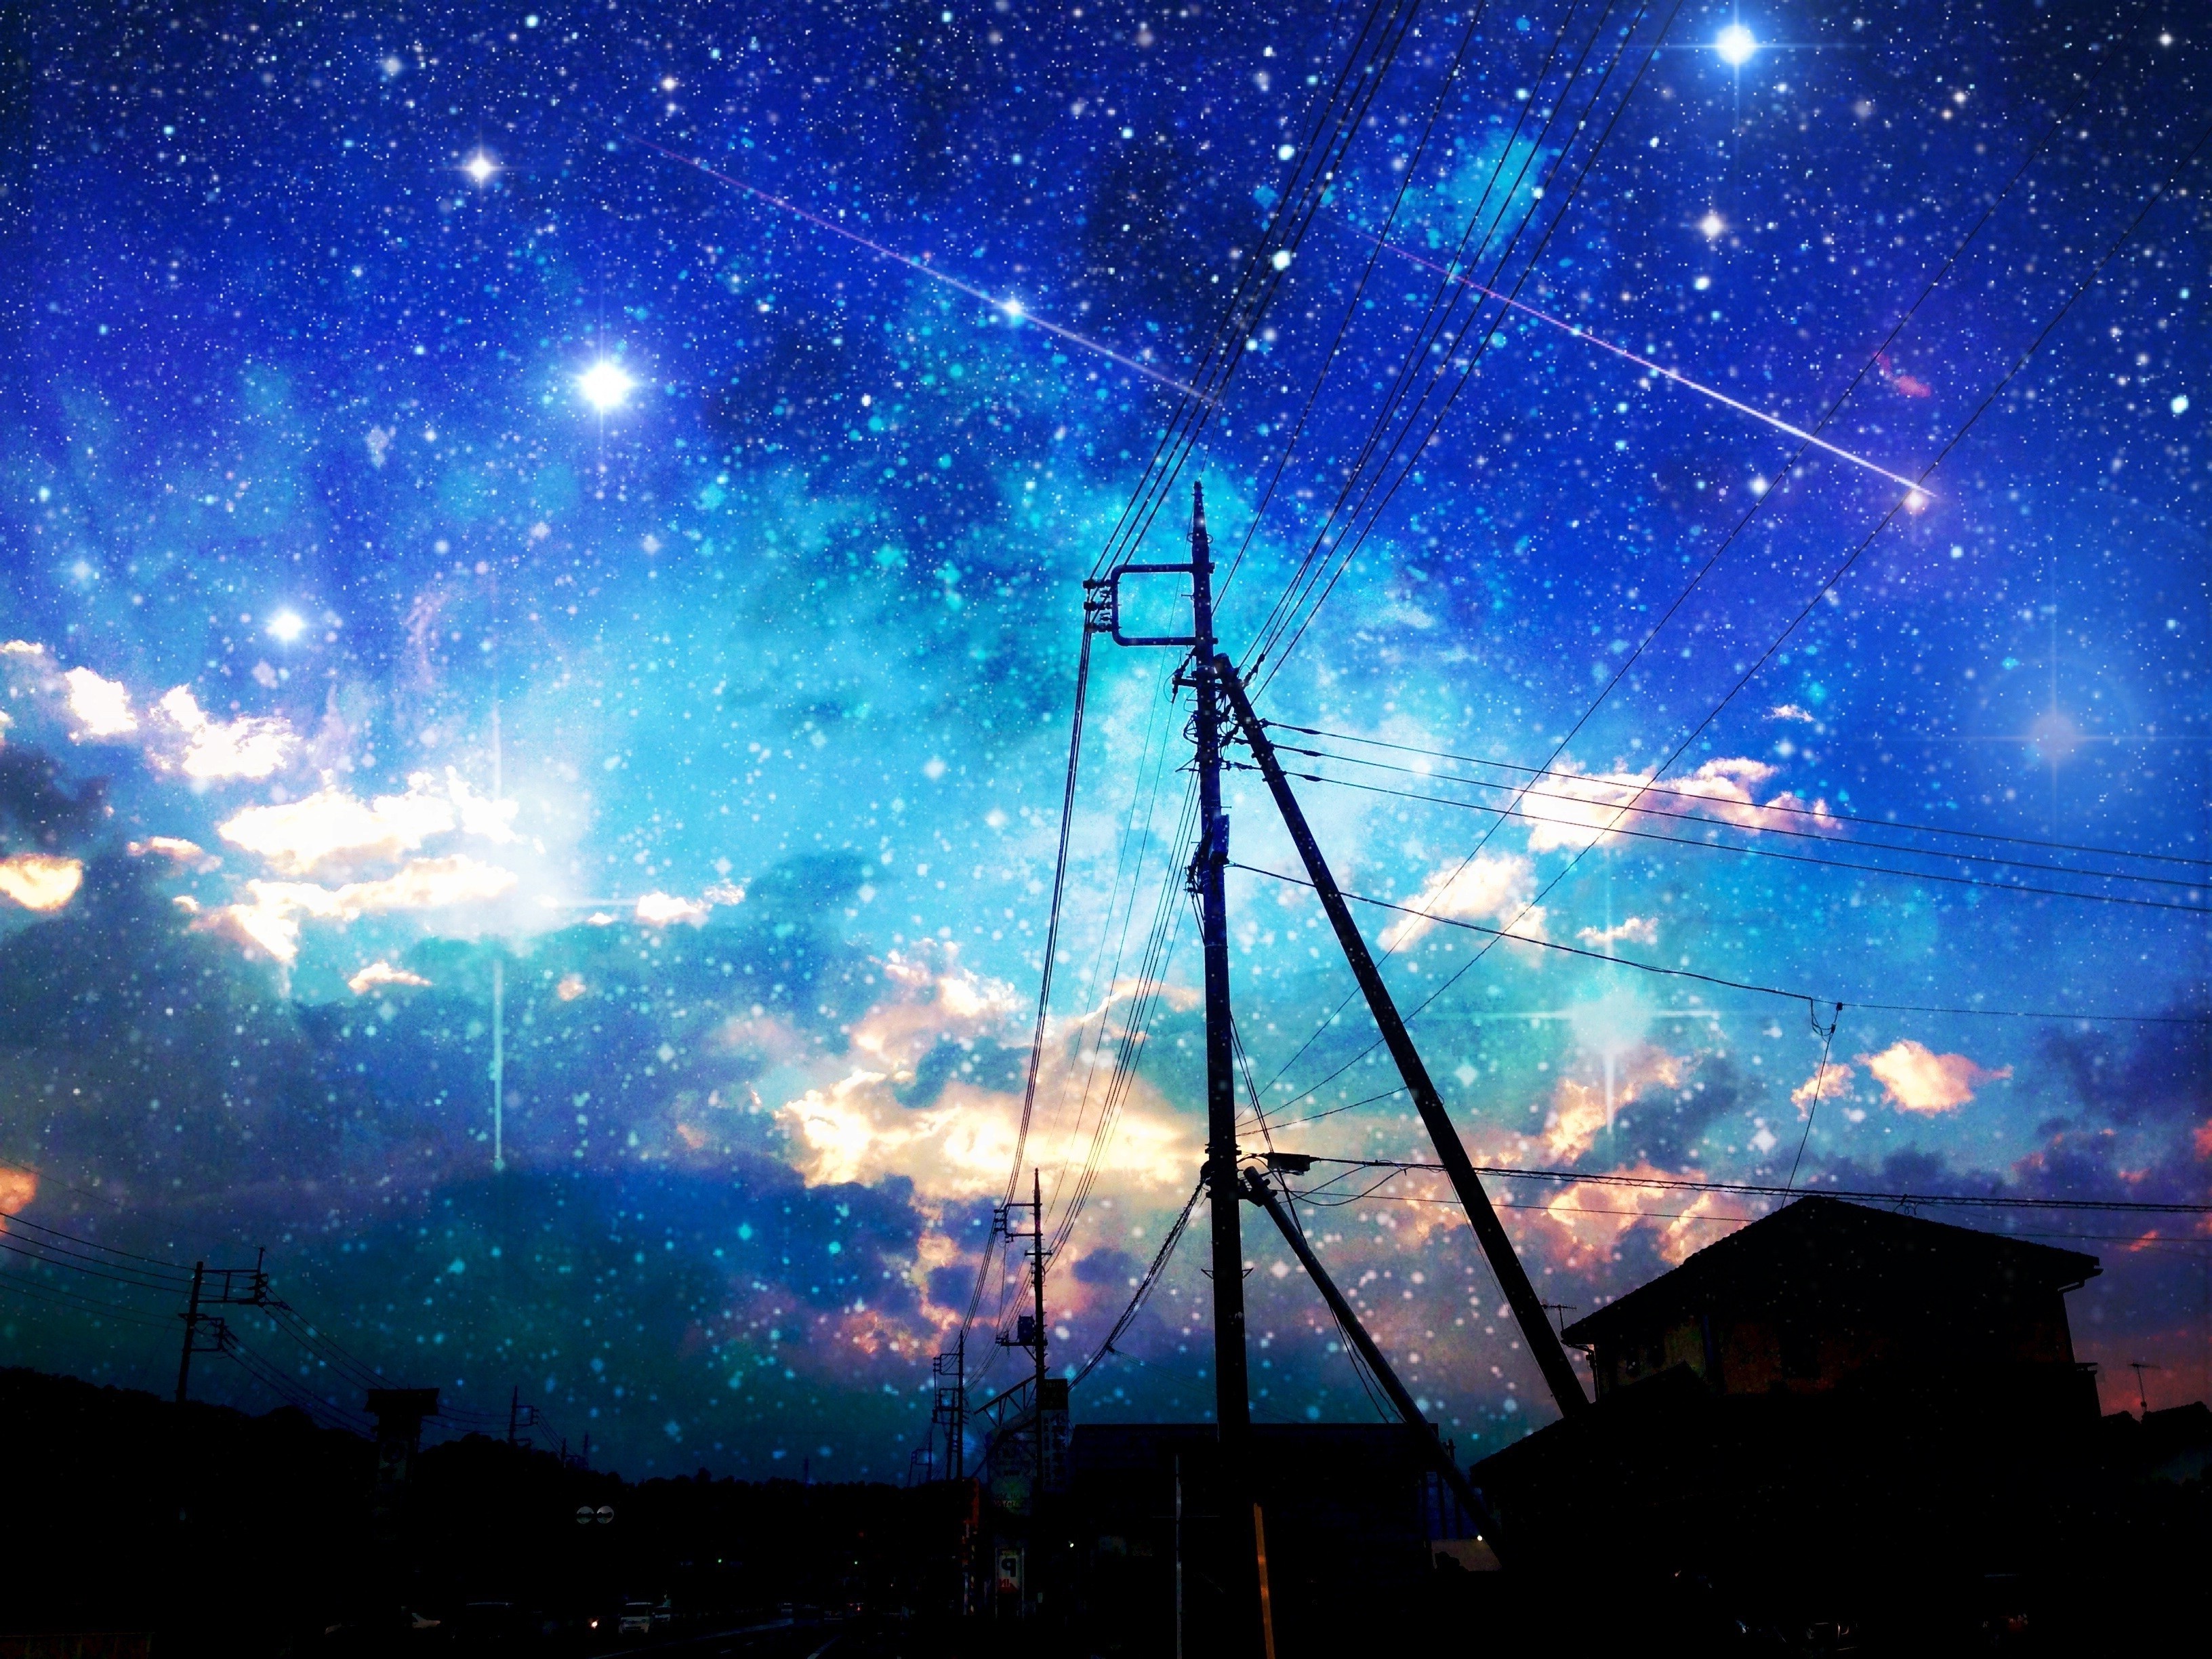 night anime wallpaper,sky,atmosphere,astronomical object,astronomy,science